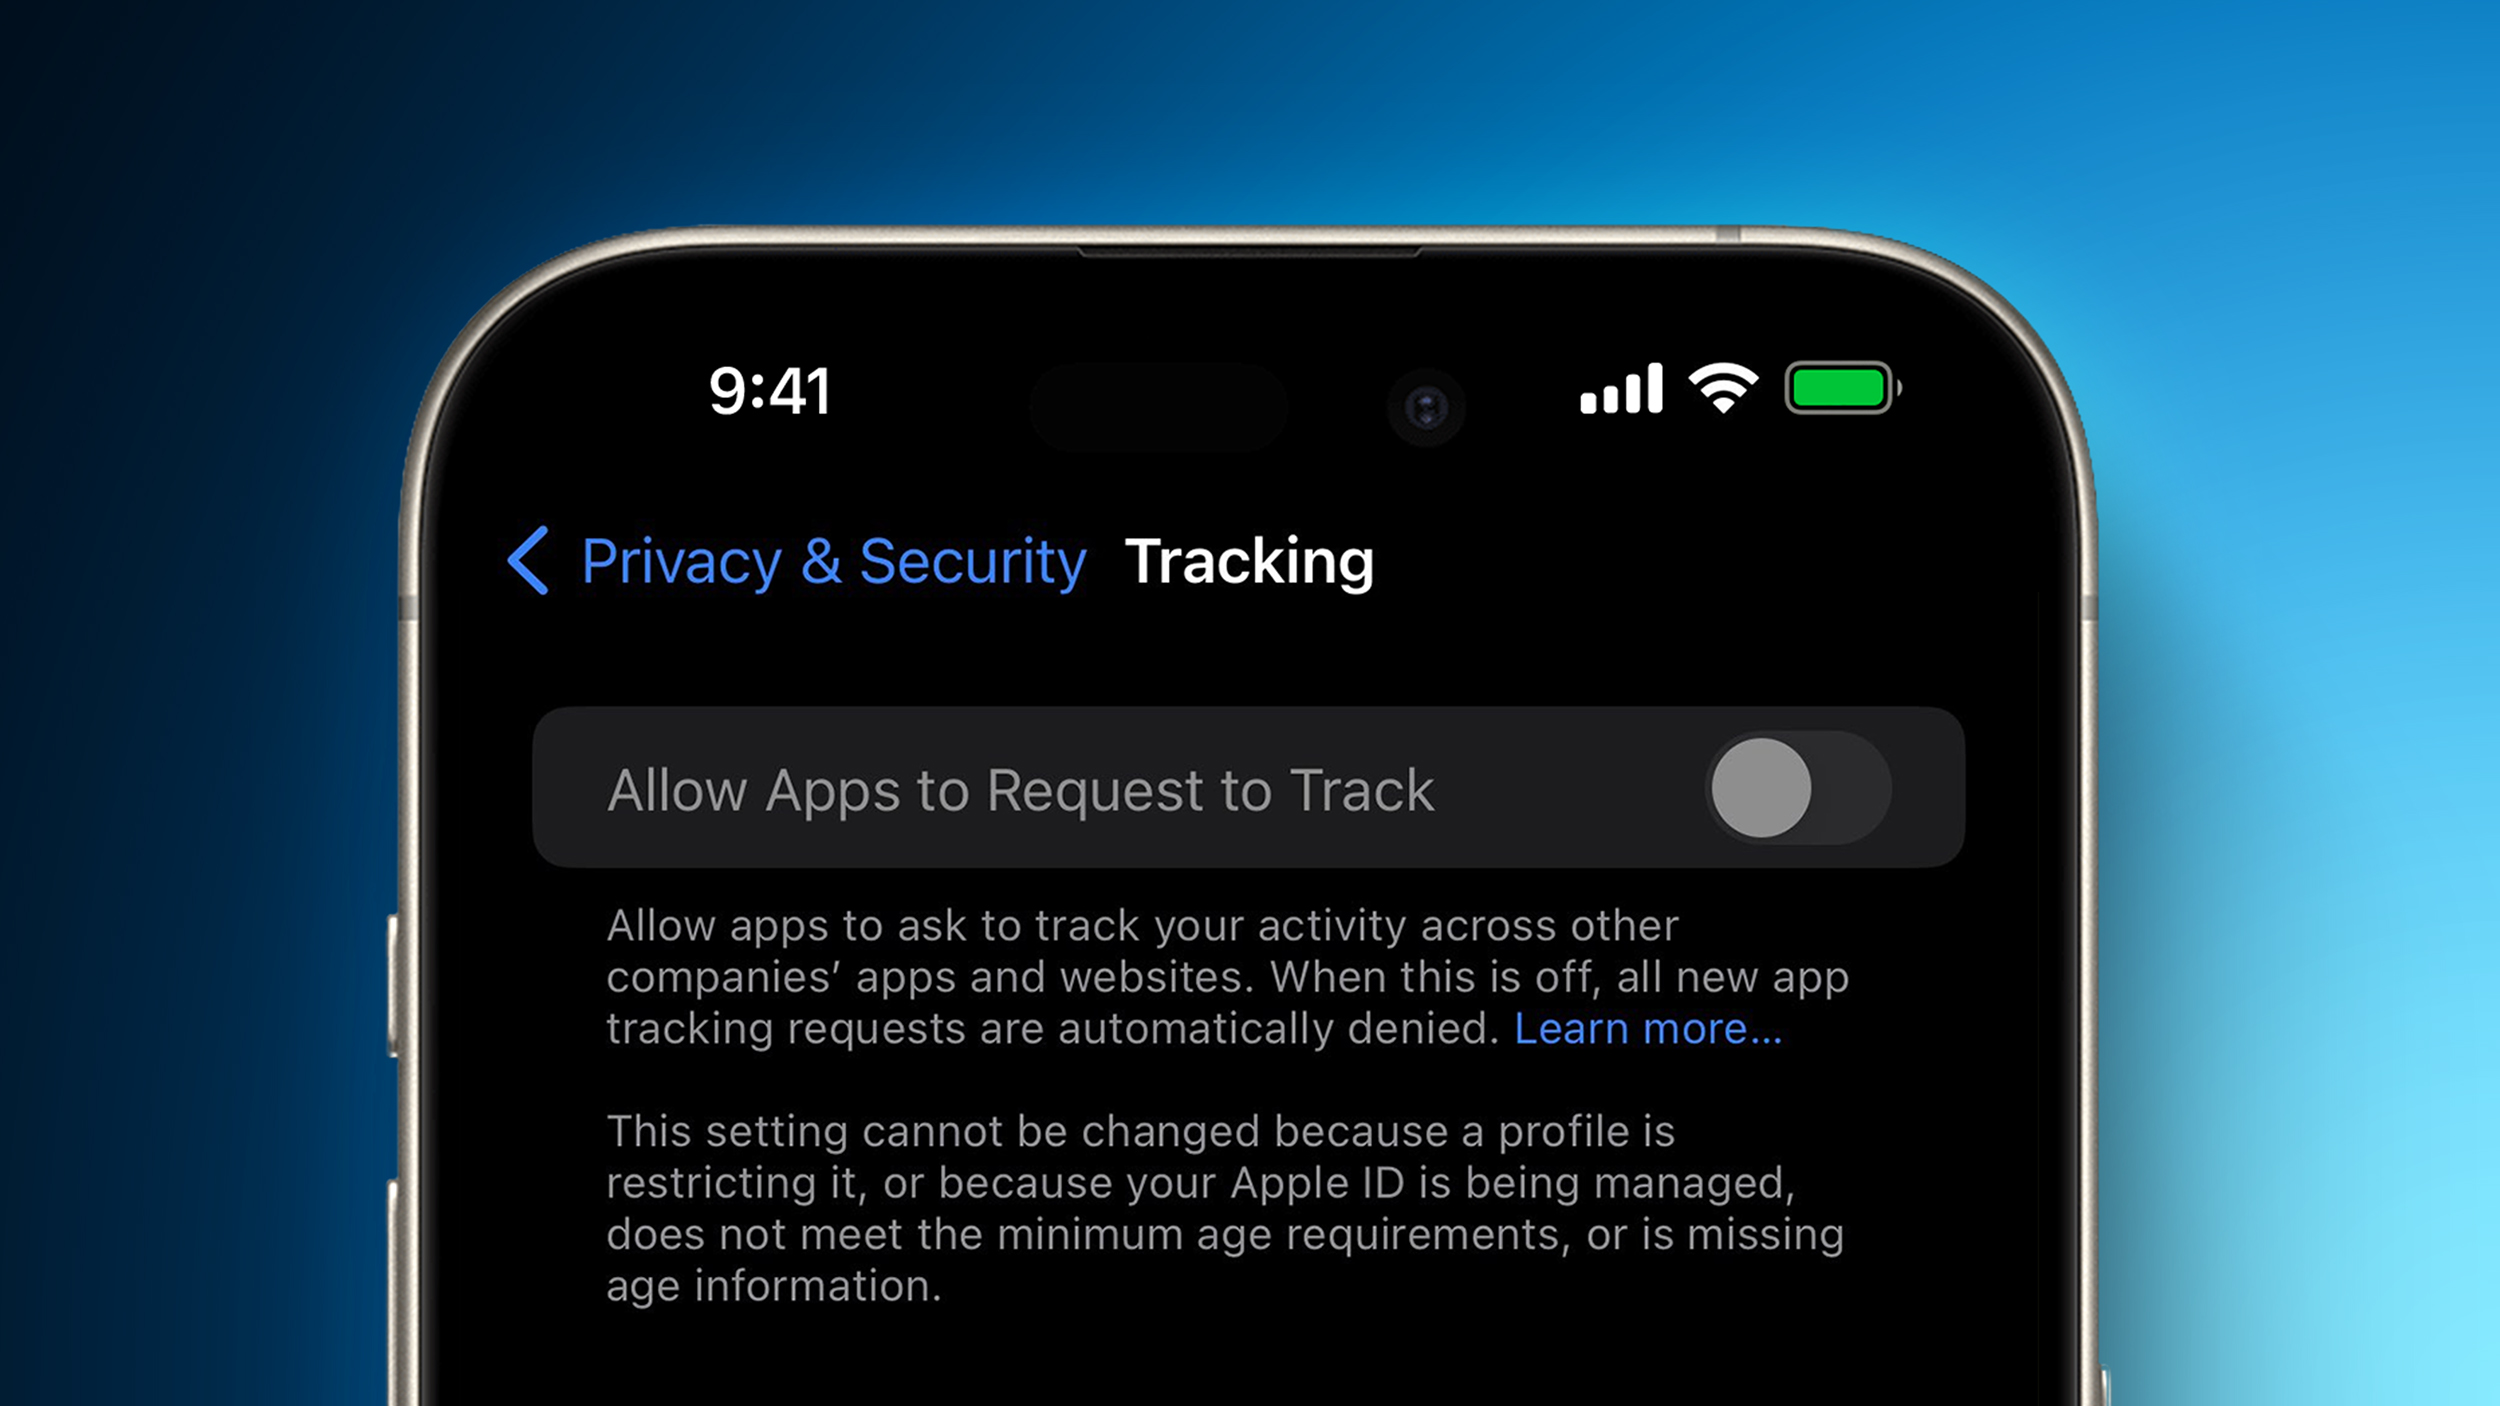 Some iPhone Users Say 'Allow Apps to Request to Track' Toggle is Suddenly Grayed Out